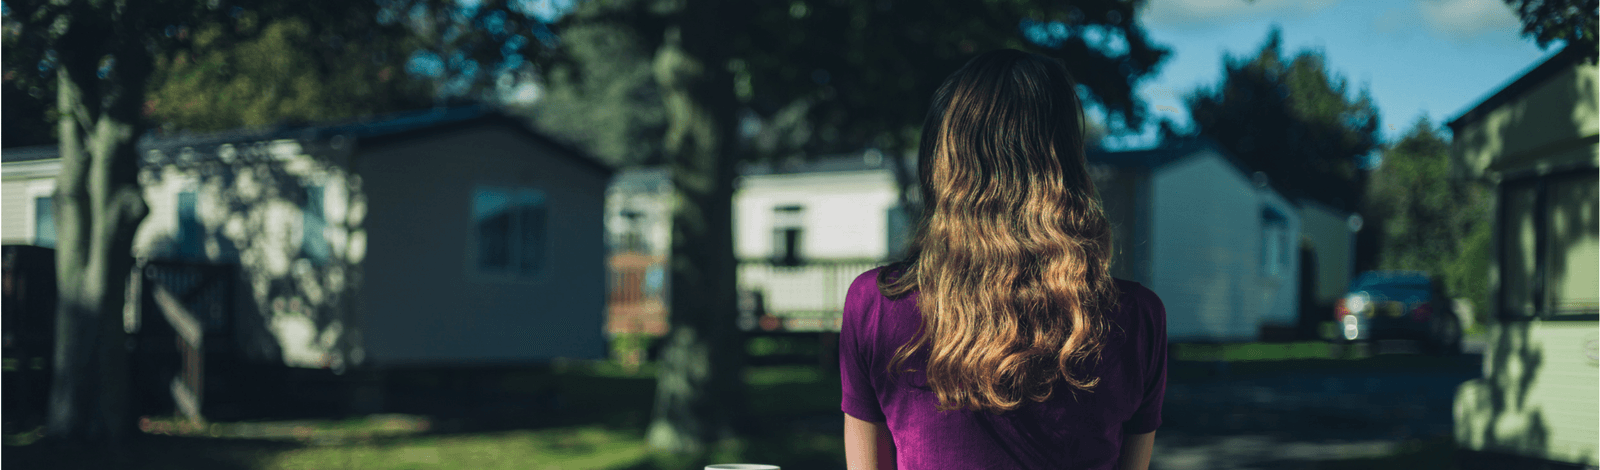 Photo of a young woman looking out on a row of manufactured houses. She is just right of center, wearing a short sleeved fuchsia t-shirt and has dark blonde wavy hair that falls several inches past her shoulders. In the background there are three manufact